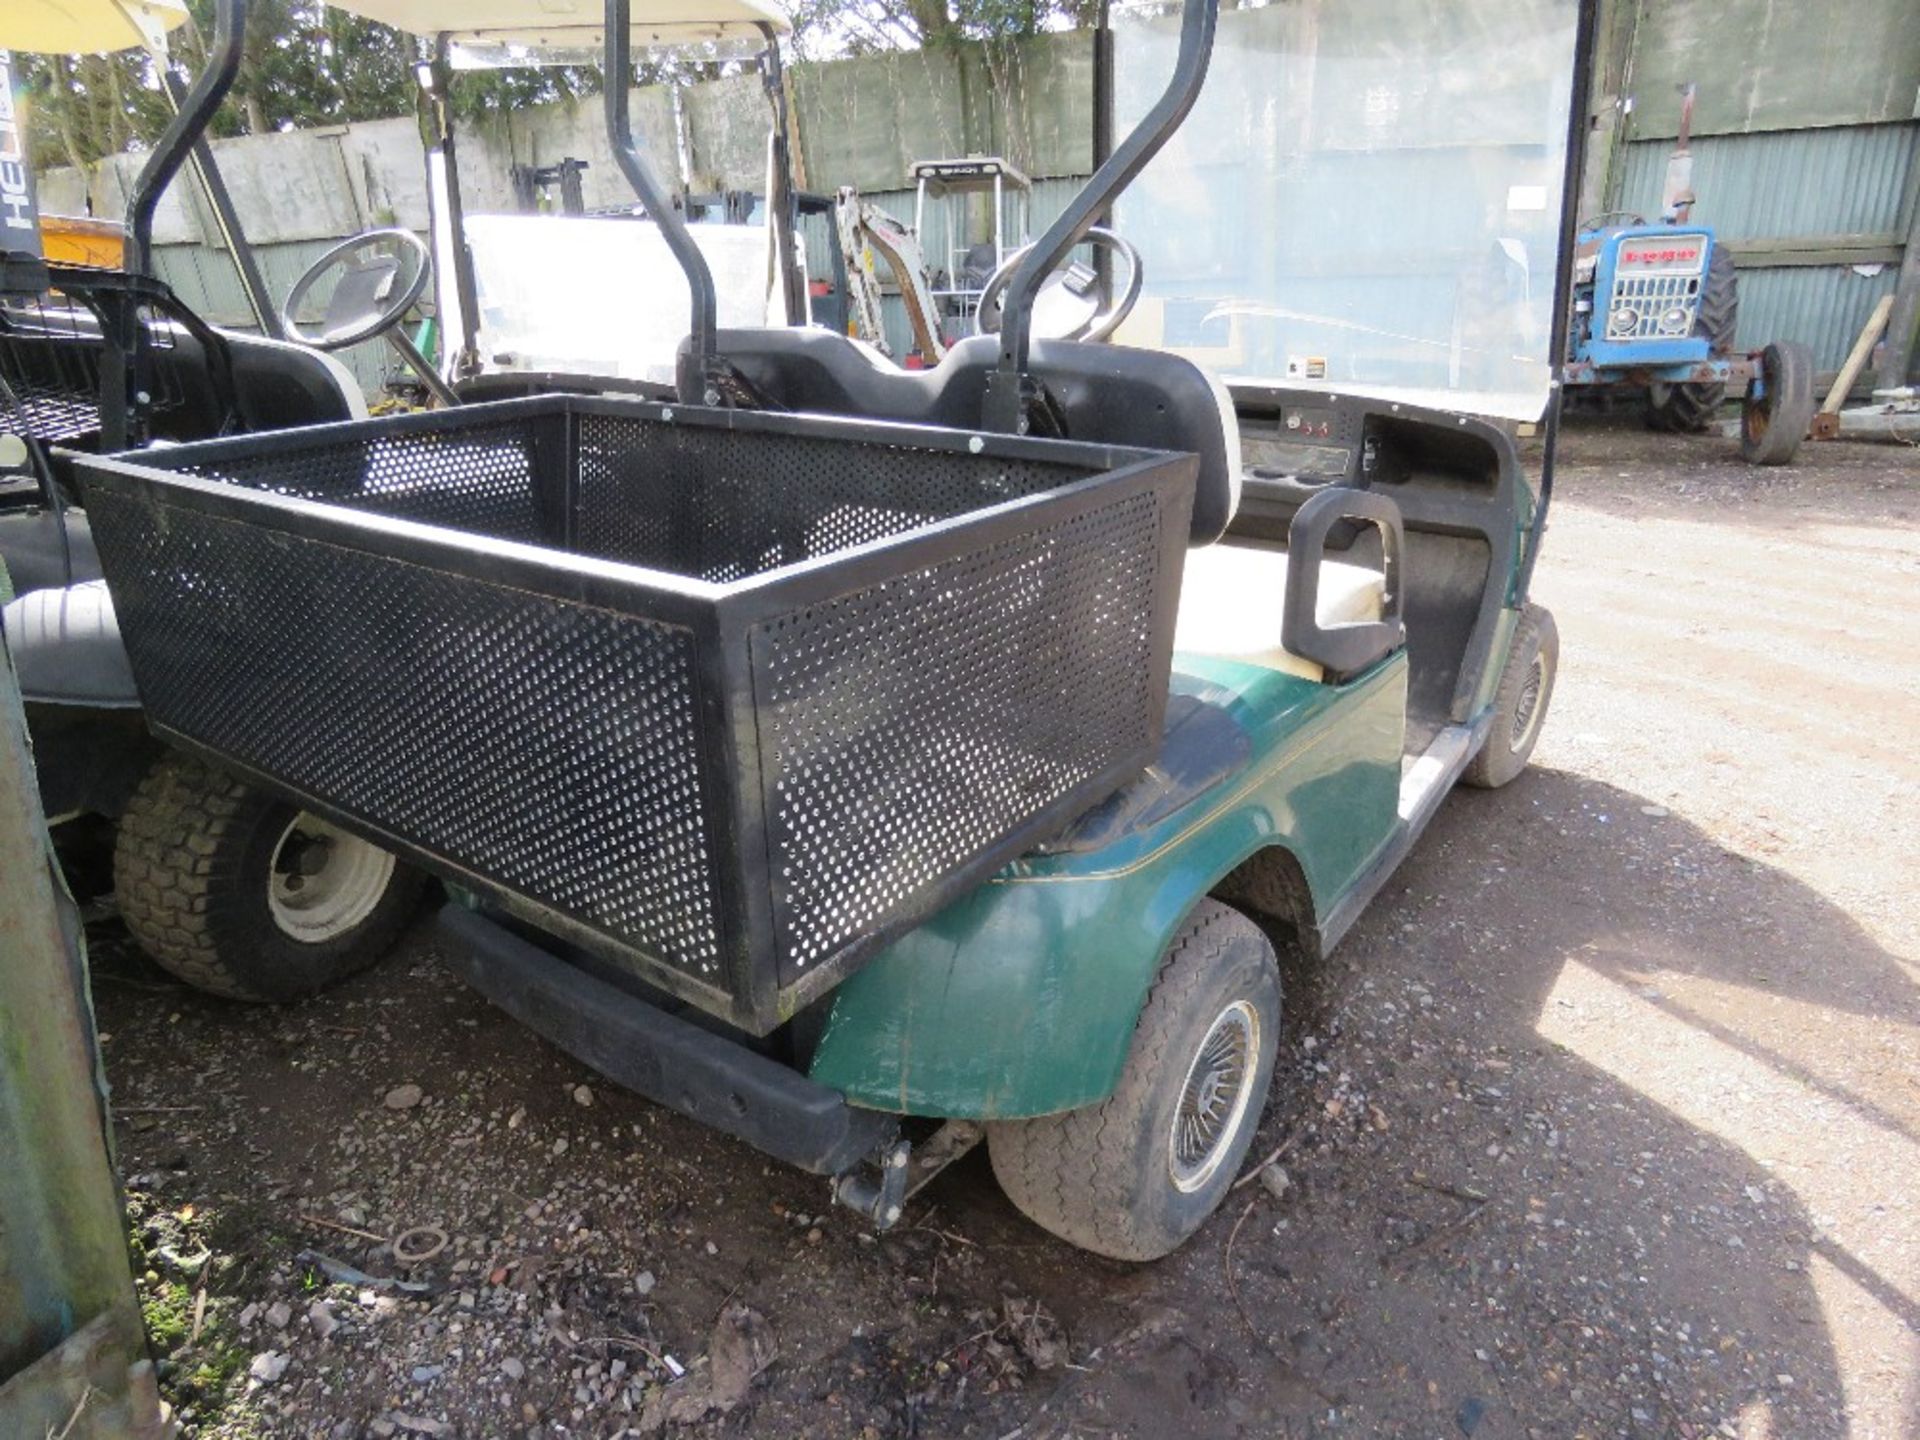 EZGO PETROL ENGINED GOLF BUGGY. GREEN COLOURED. WHEN TESTED WAS SEEN TO RUN, DRIVE, STEER AND BRAKE - Image 4 of 8